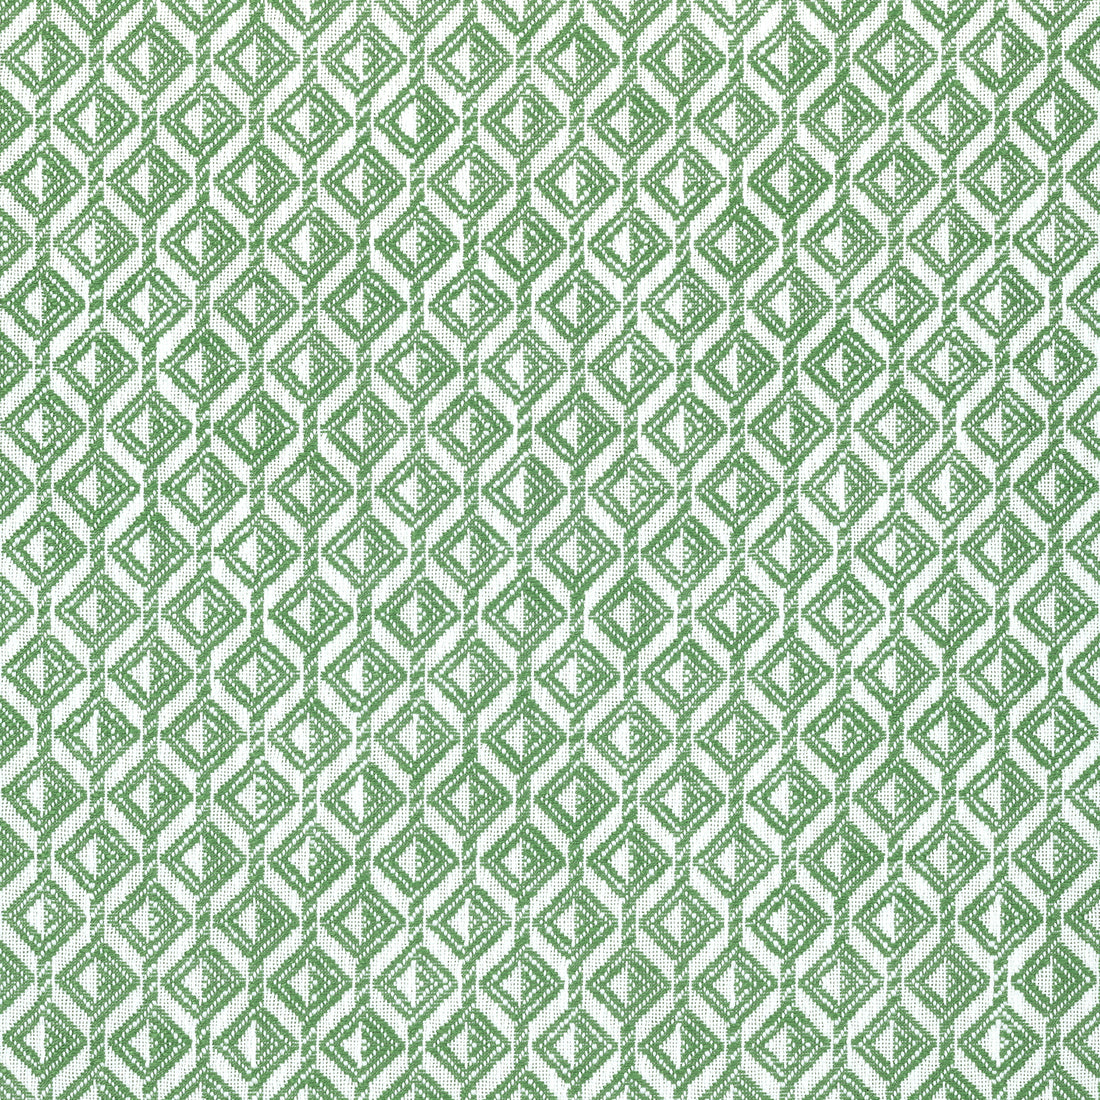 Trion fabric in kelly green color - pattern number W73455 - by Thibaut in the Landmark collection